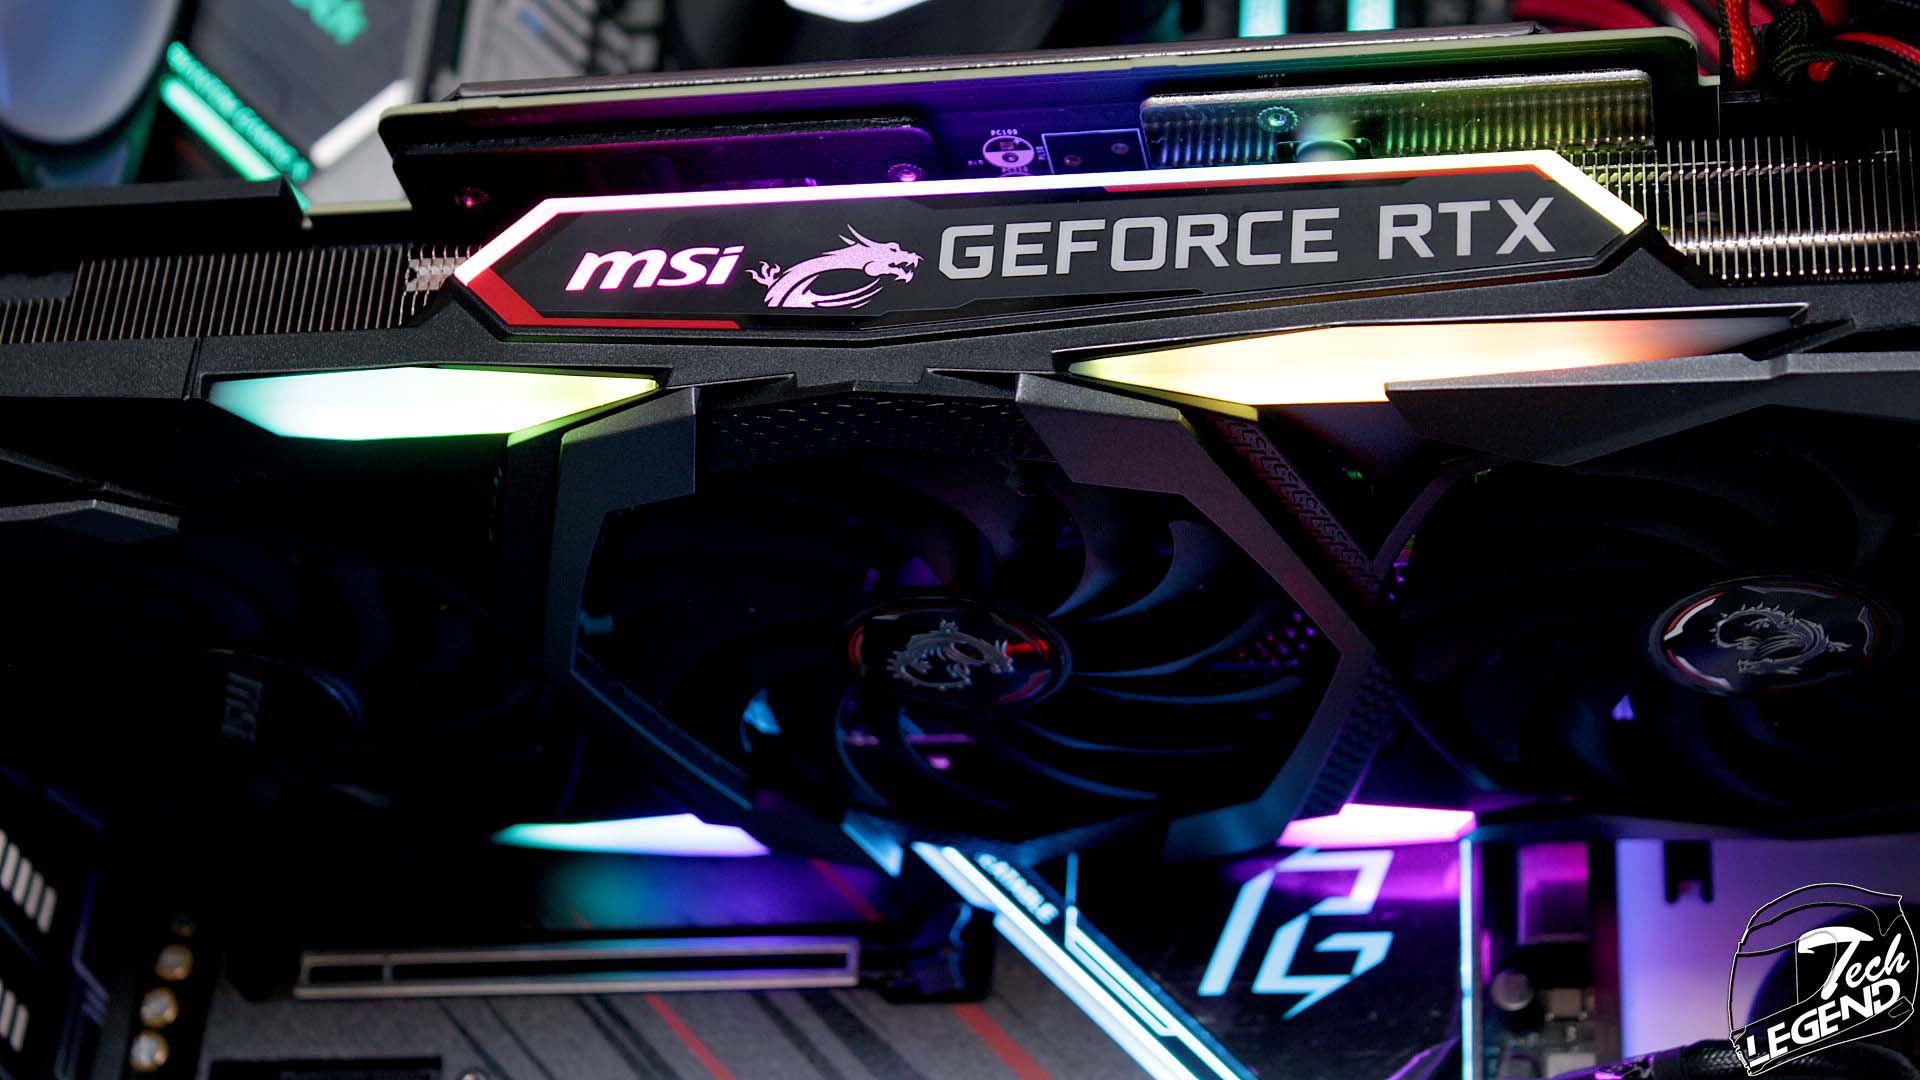 MSI GeForce RTX 2070 Super Gaming X Trio Card Review